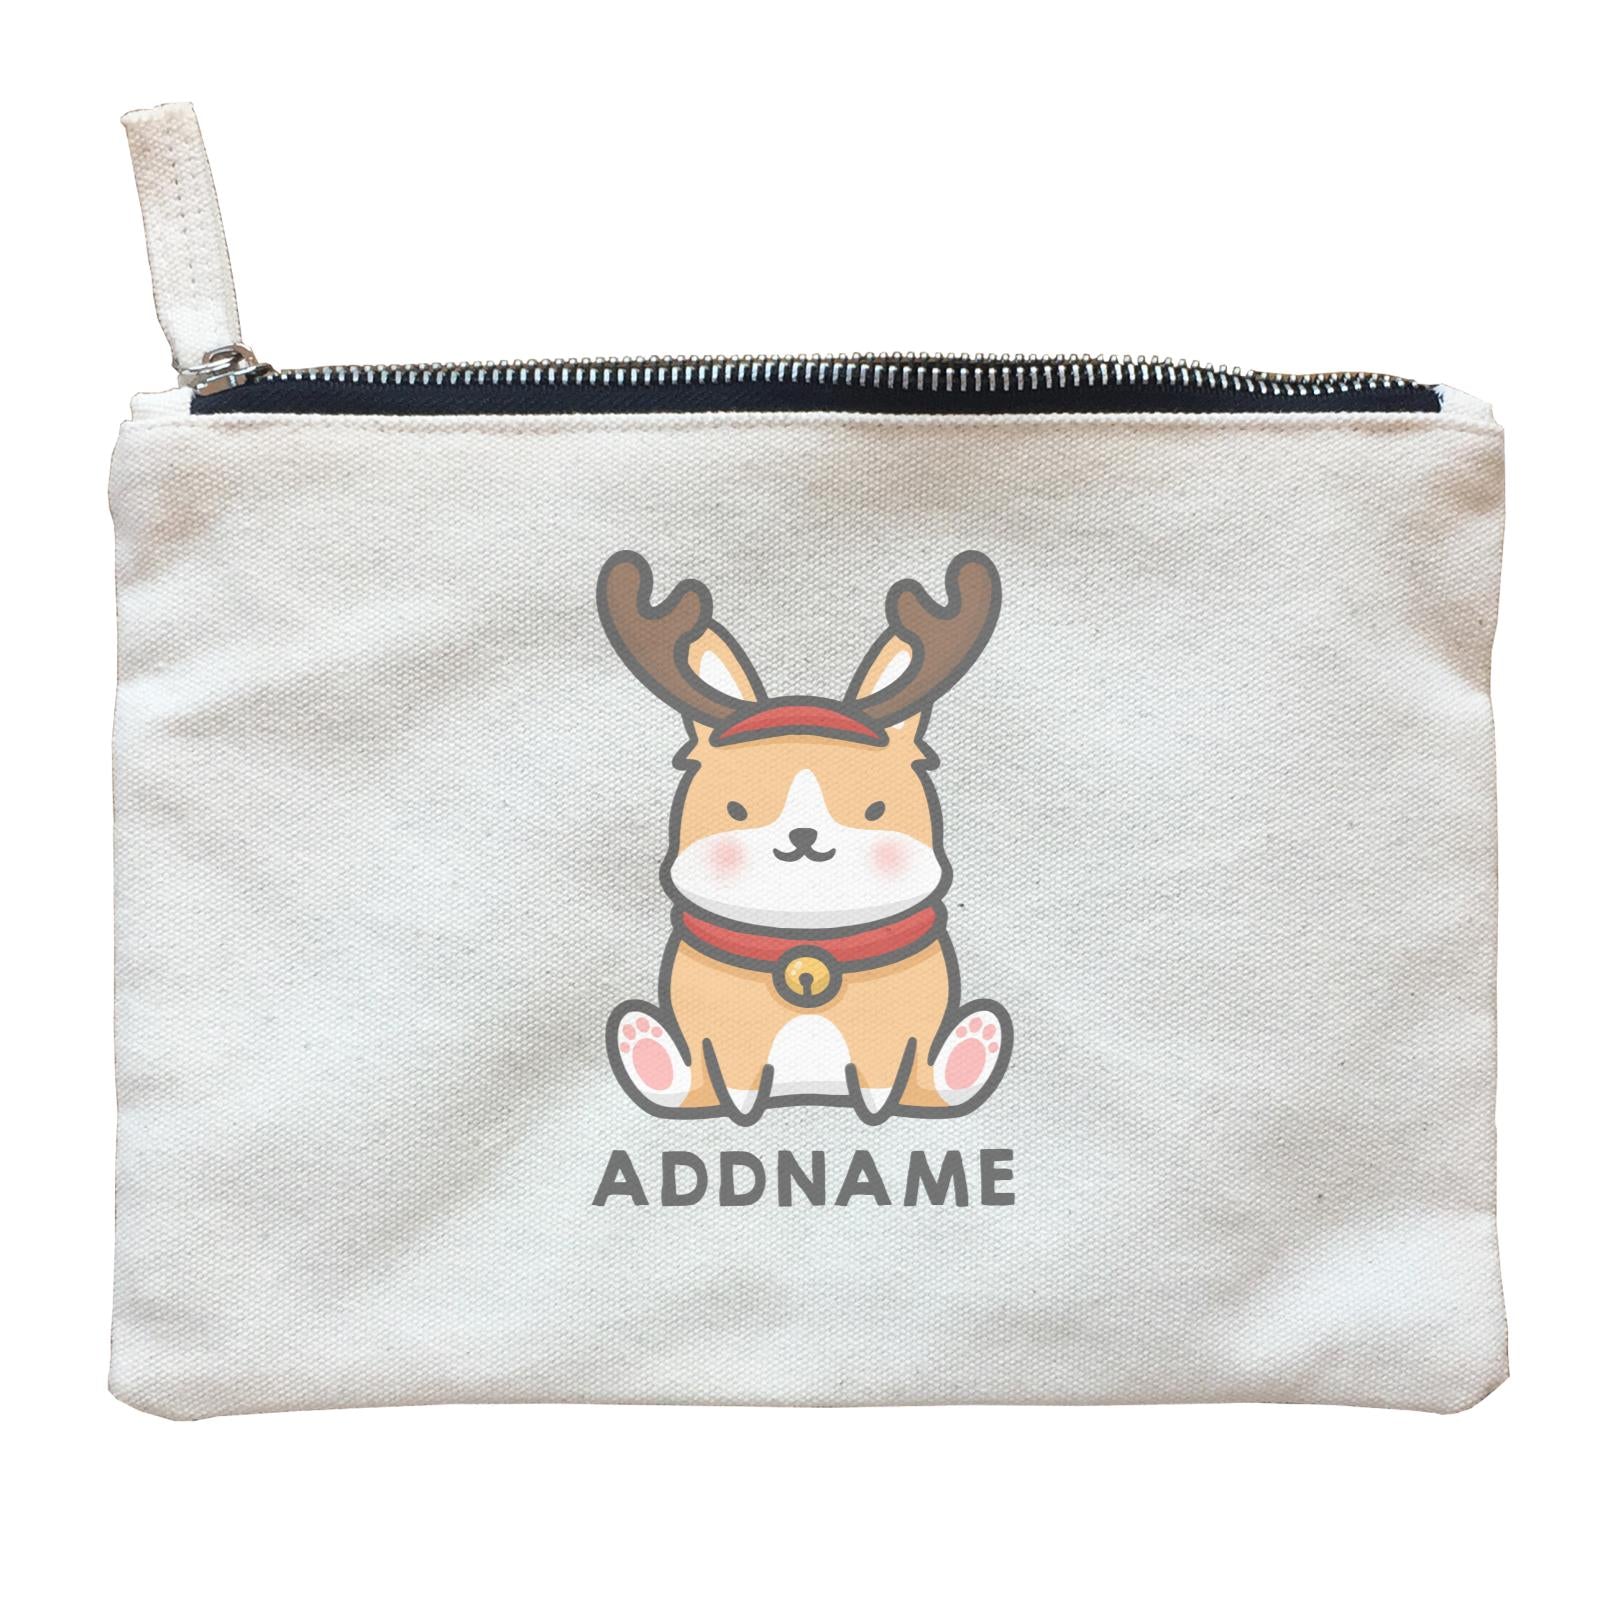 Xmas Cute Dog With Reindeer Antlers Addname Accessories Zipper Pouch